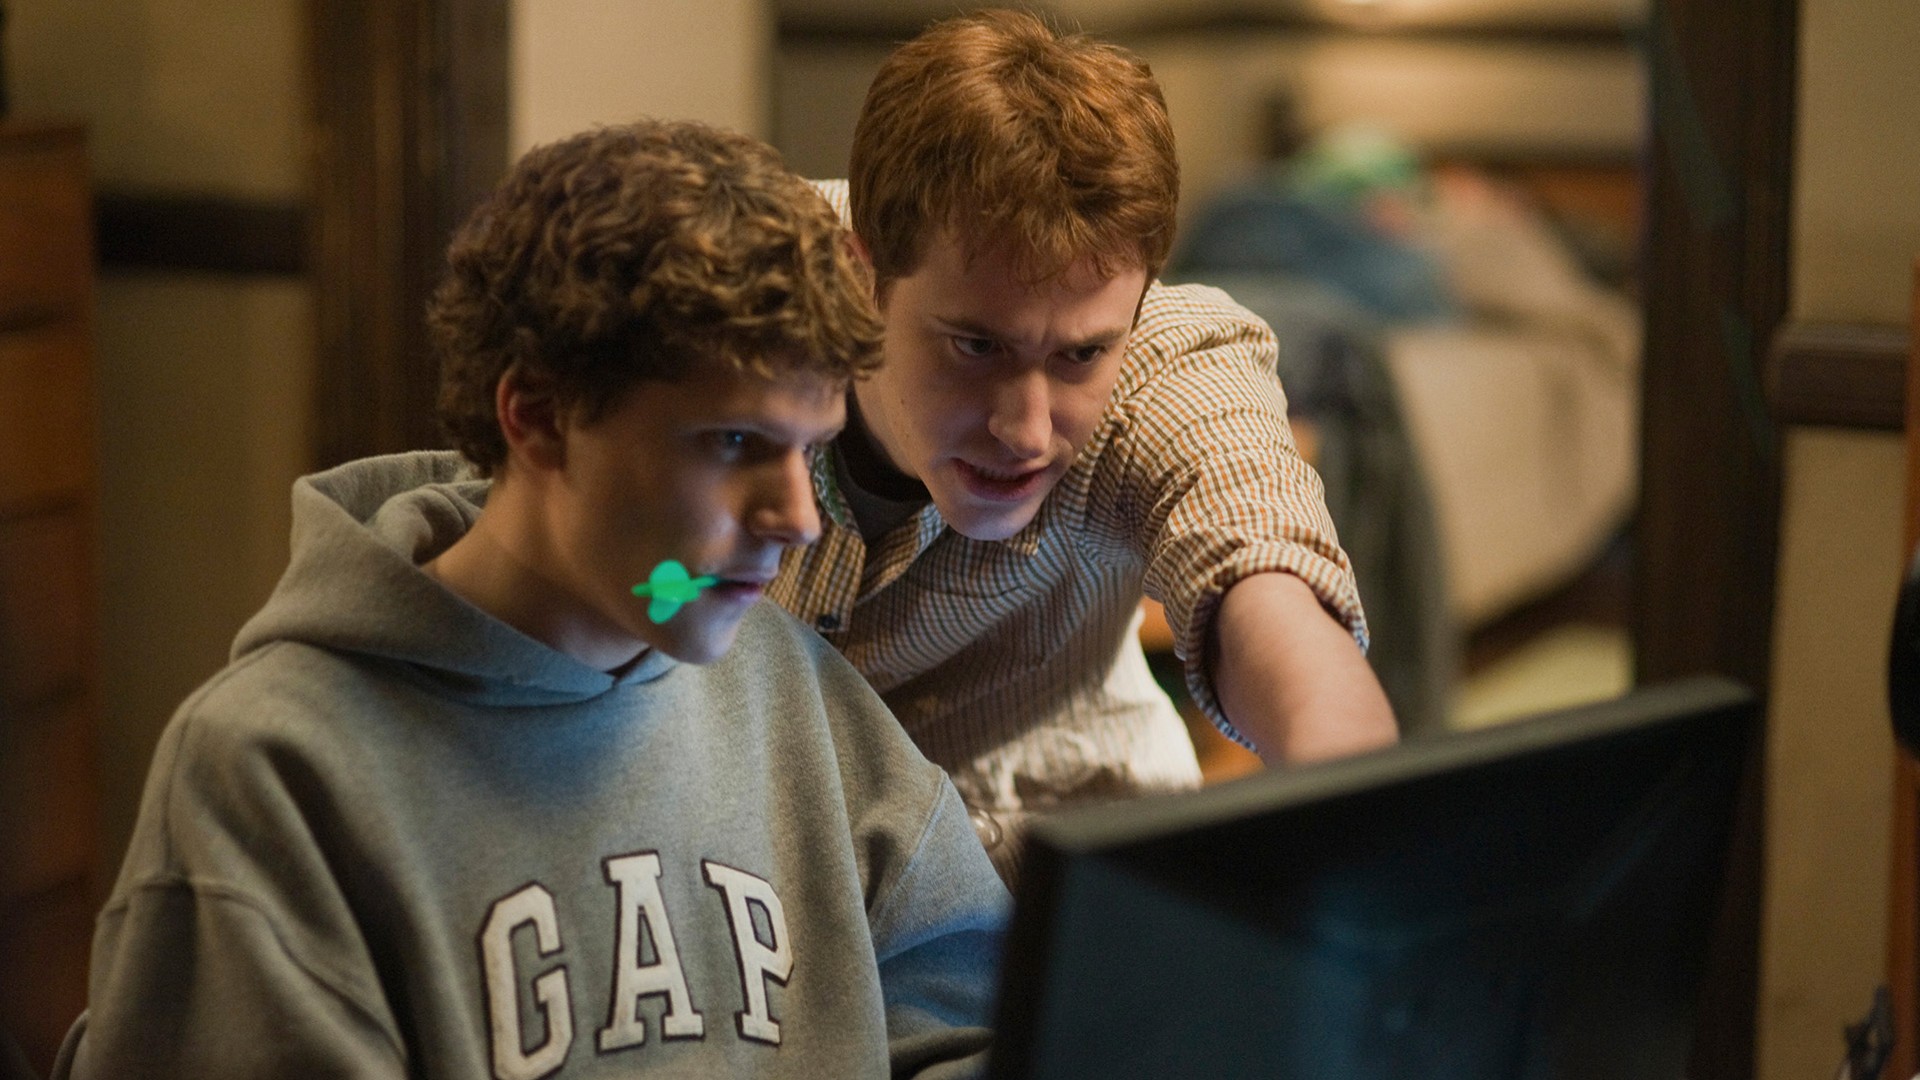 The Social Network: The Story of the Beginning of Facebook has made it to the Netflix catalog